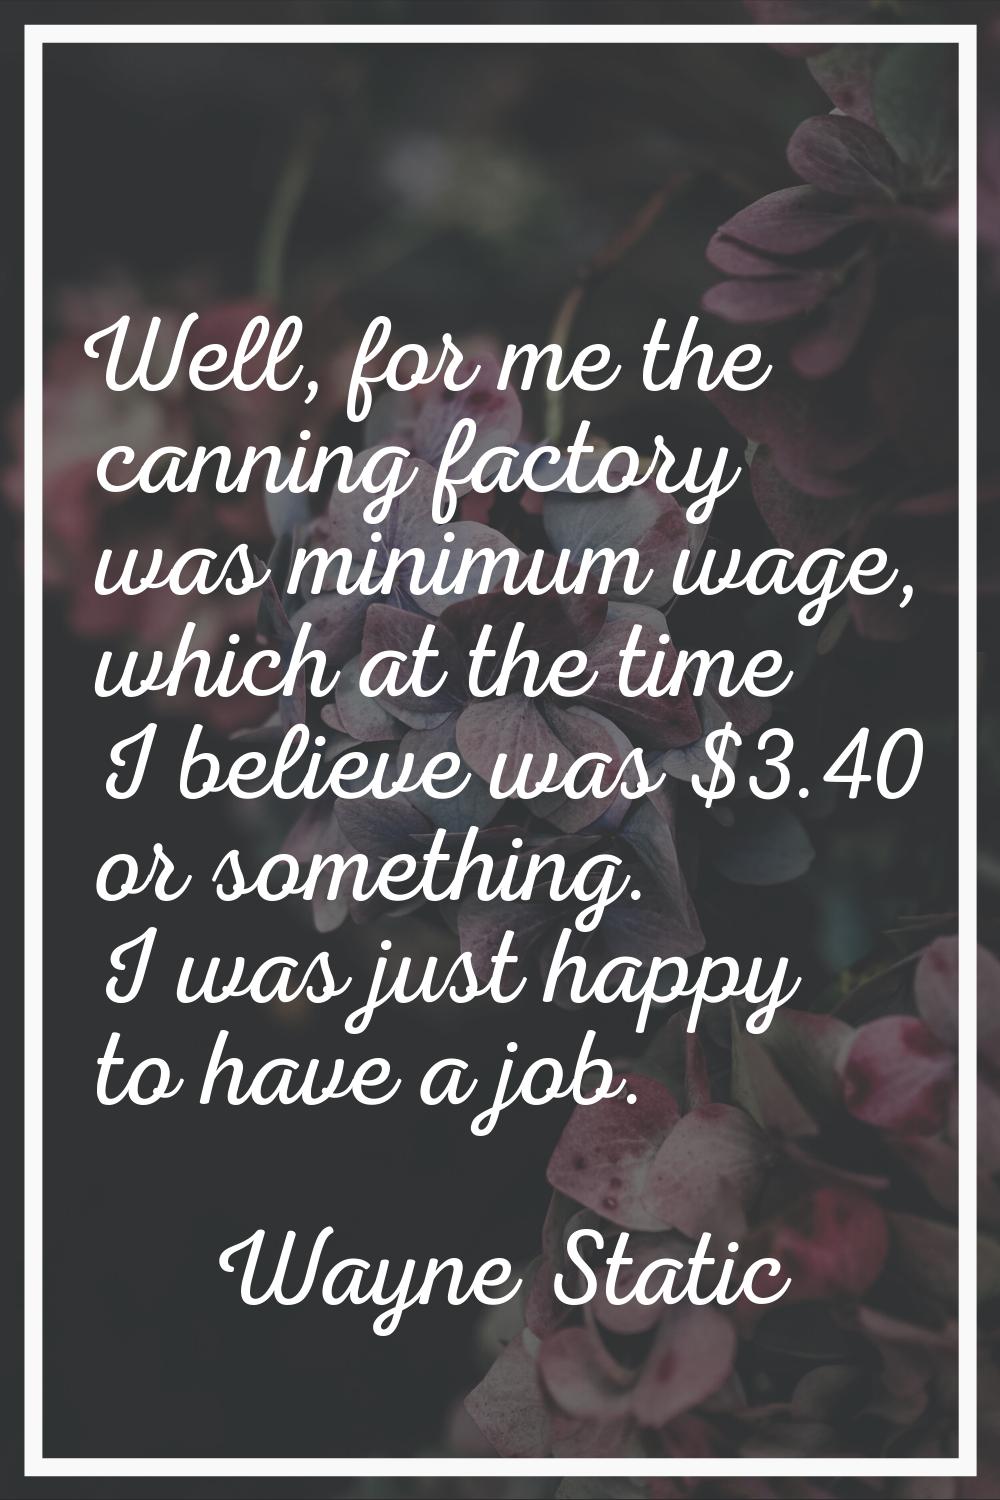 Well, for me the canning factory was minimum wage, which at the time I believe was $3.40 or somethi